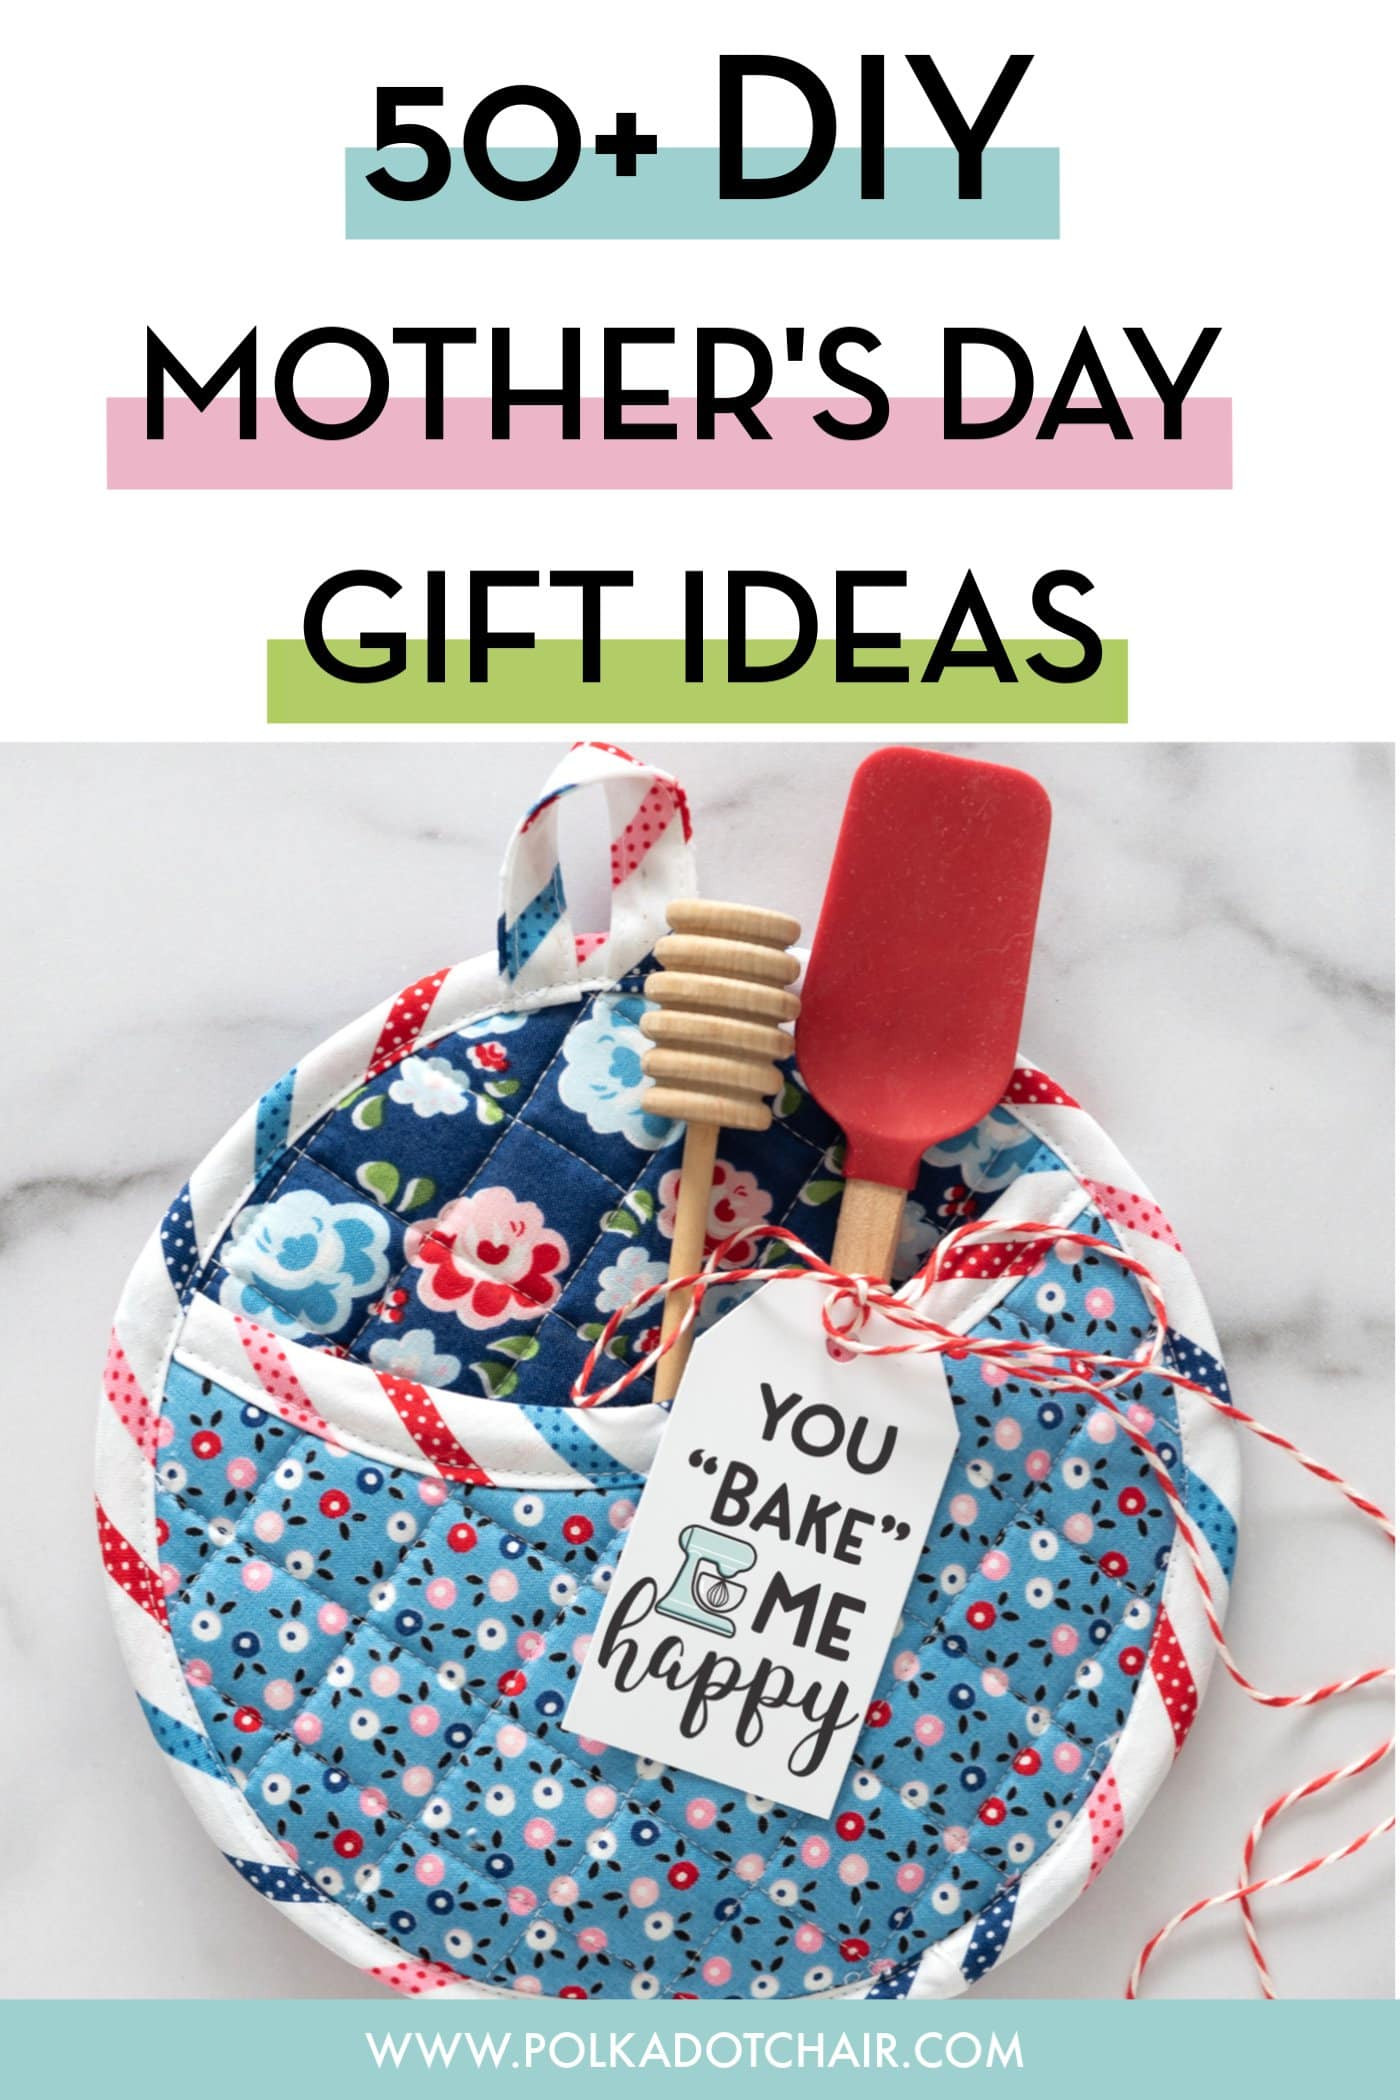 DIY Mothers Day Gifts From Kids
 50 DIY Mother s Day Gift Ideas & Projects